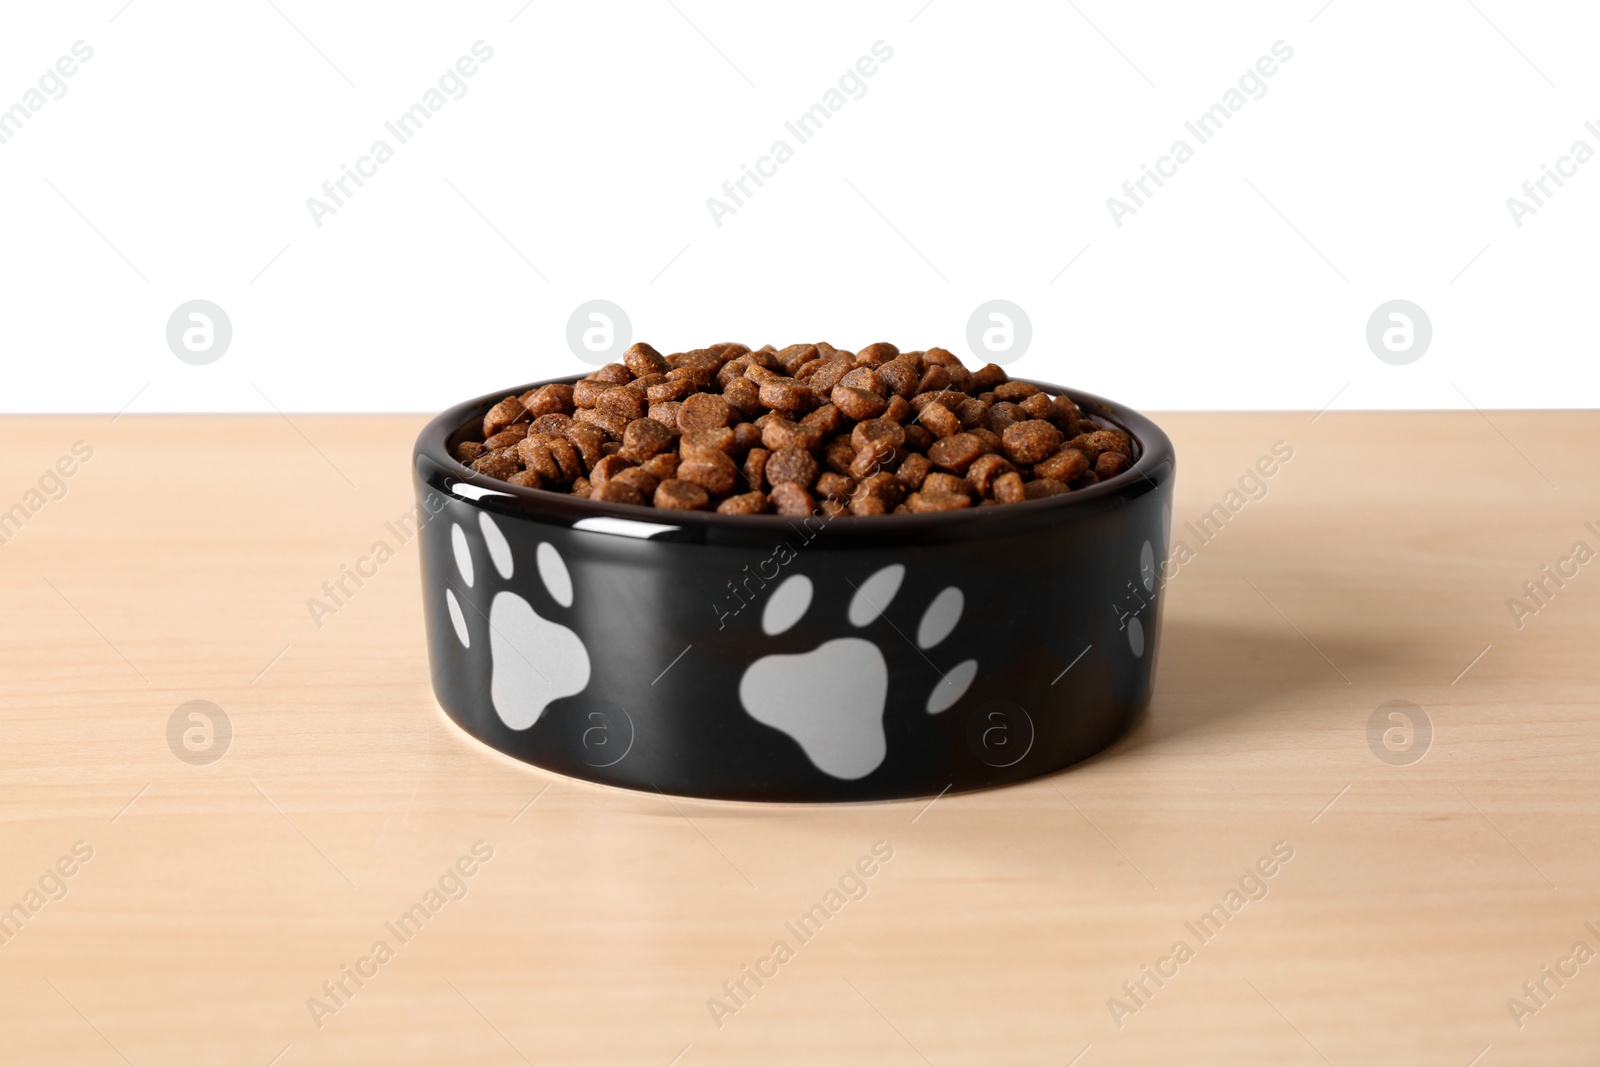 Photo of Dry dog food in pet bowl on wooden surface